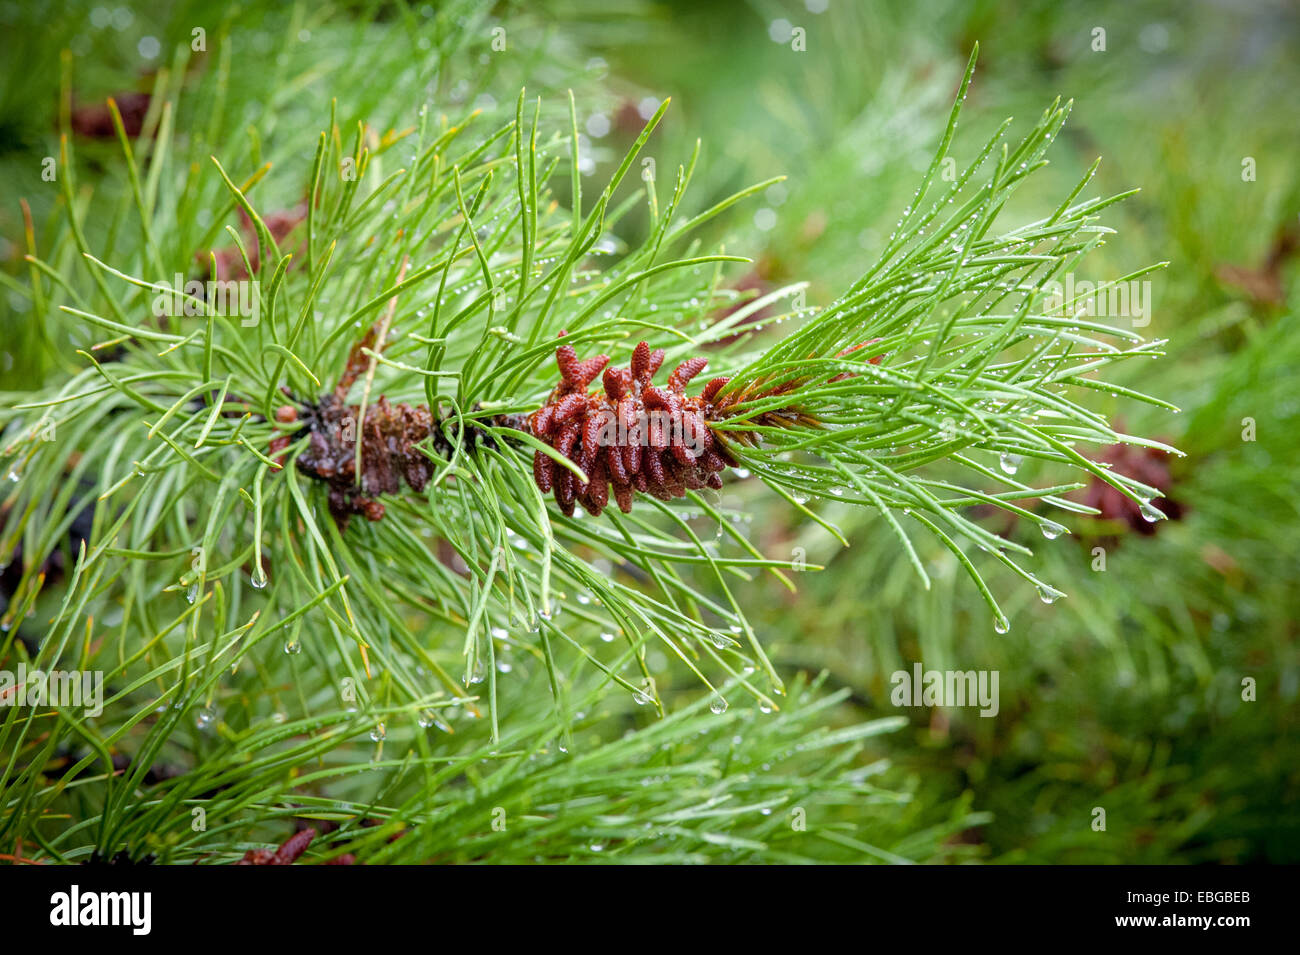 Pine cones (Pinus) growing on a branch Stock Photo